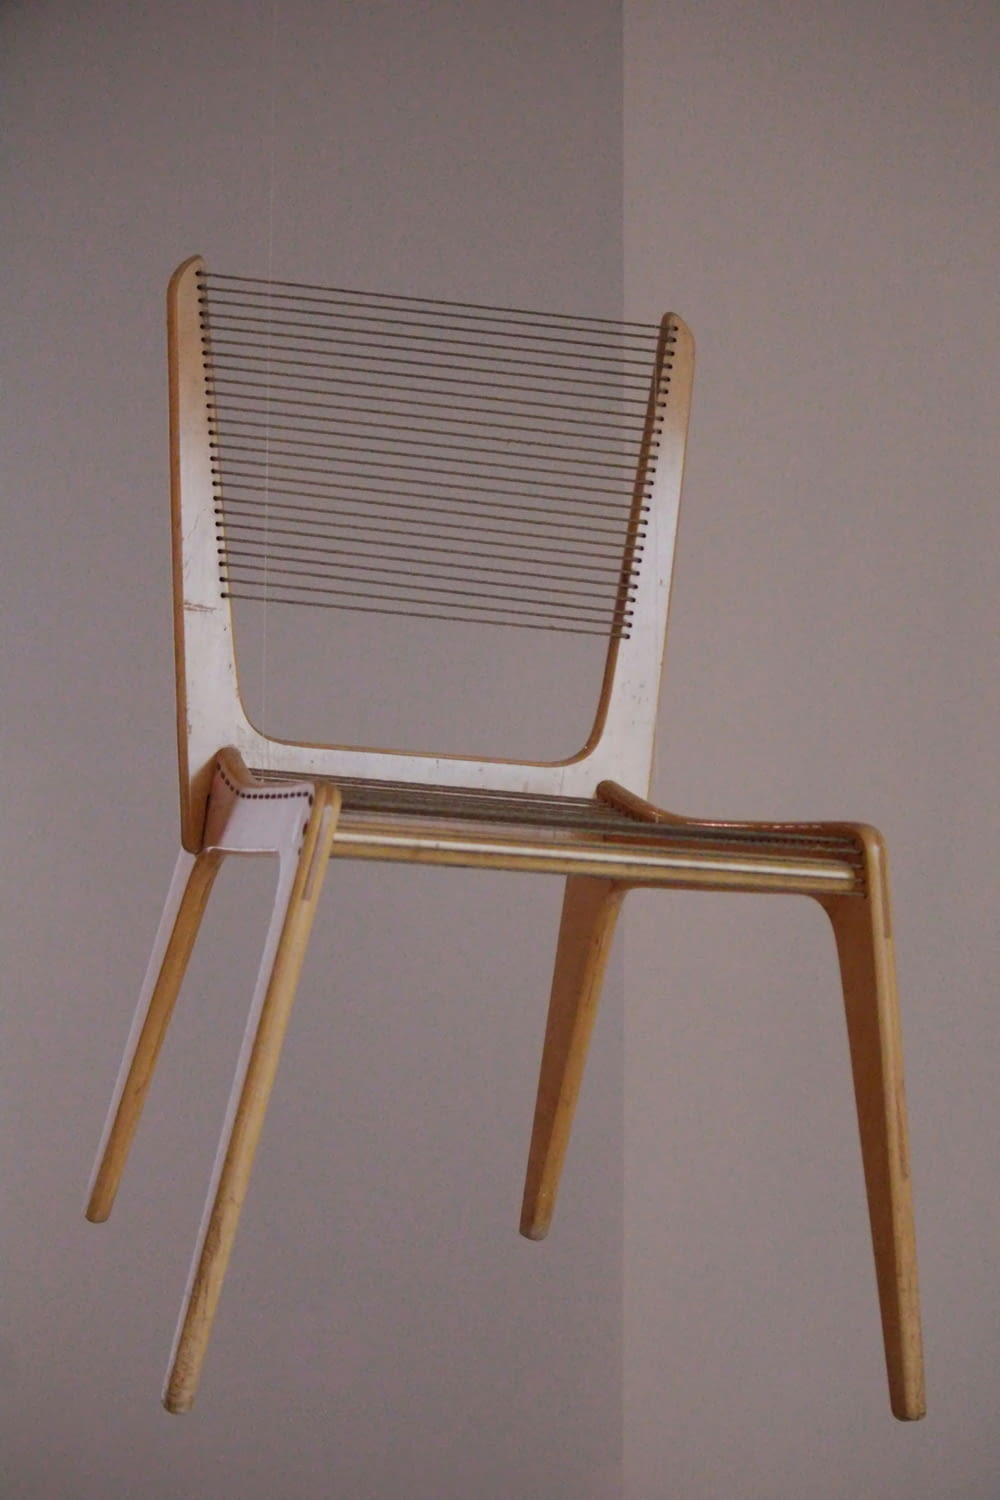 a wooden chair hanging from the ceiling